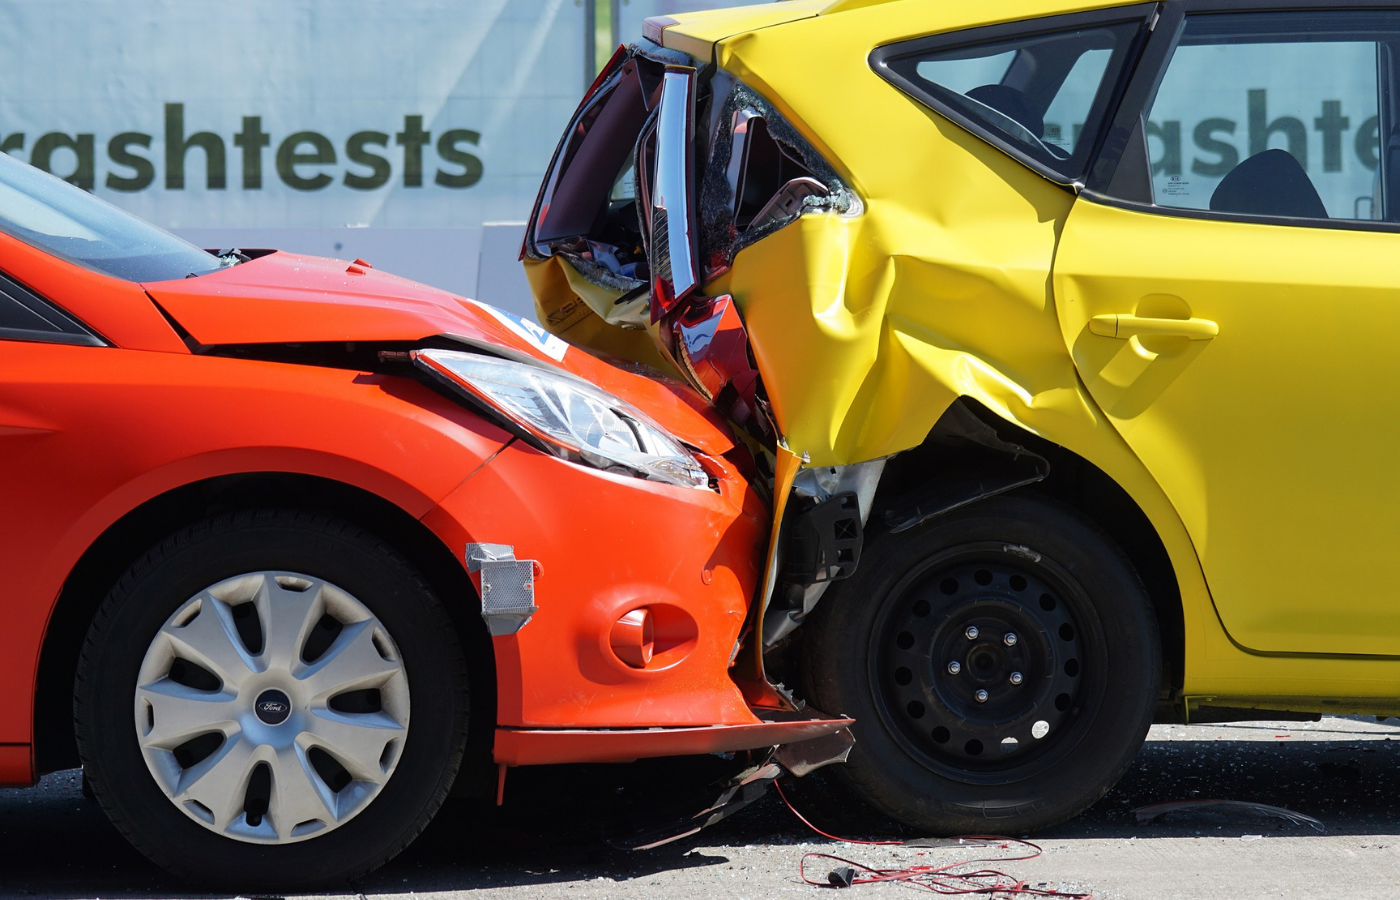 An orange car in a front-end collision with the rear-end of a yellow hatchback during a crash test evaluation